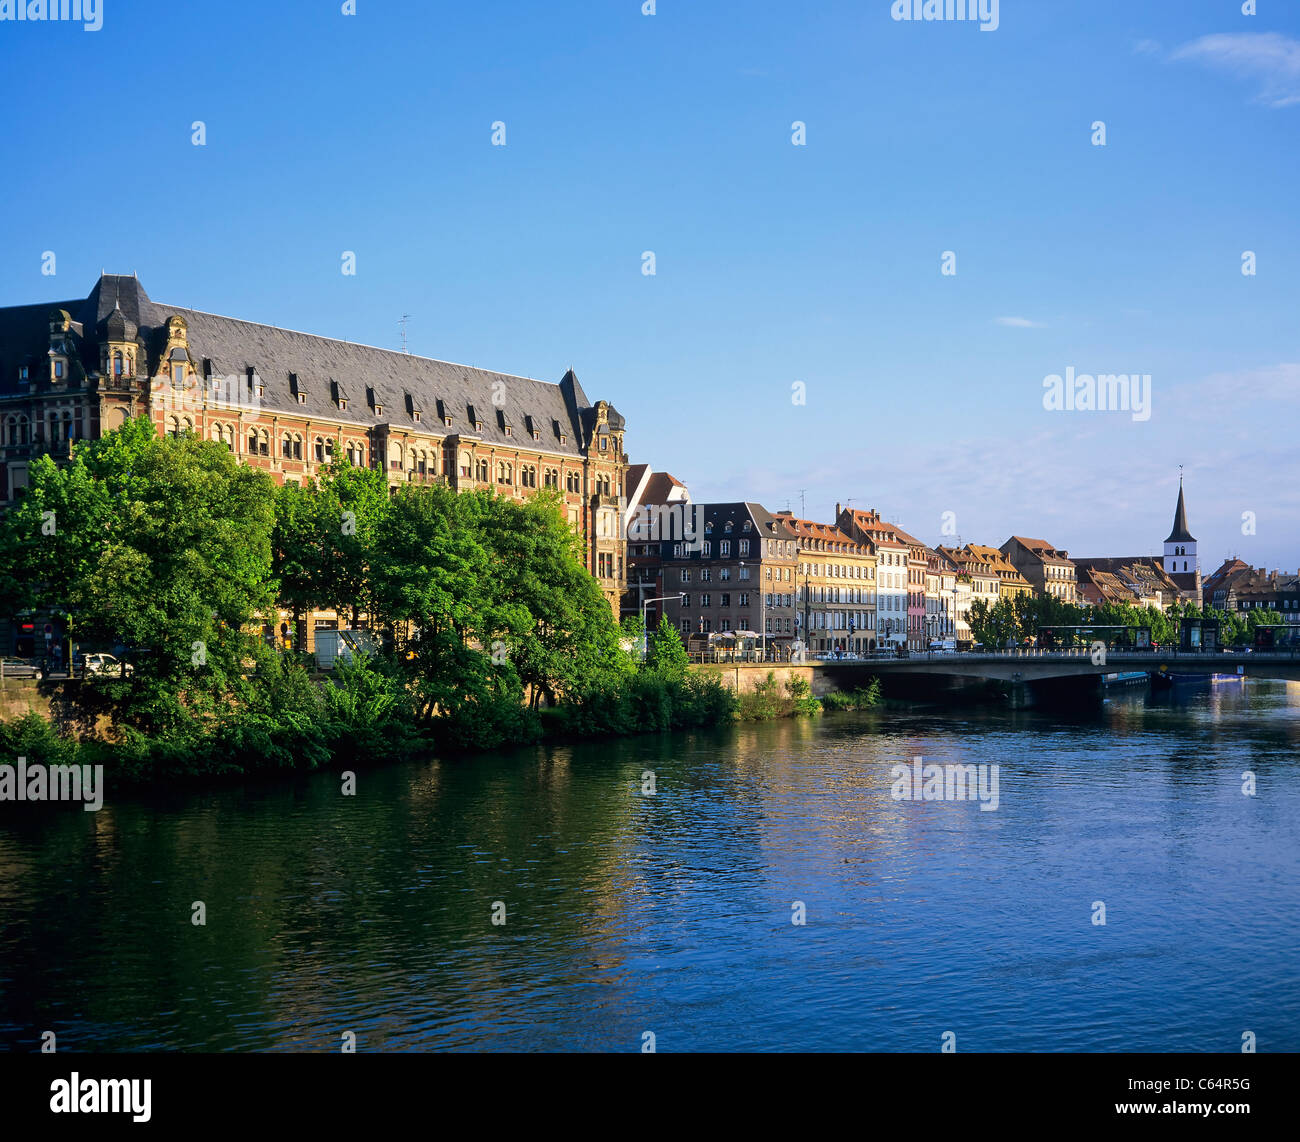 Gallia building, student residence, dorm accomodation,Ill river, waterfront houses perspective, sunset, Strasbourg, Alsace, France, Europe, Stock Photo